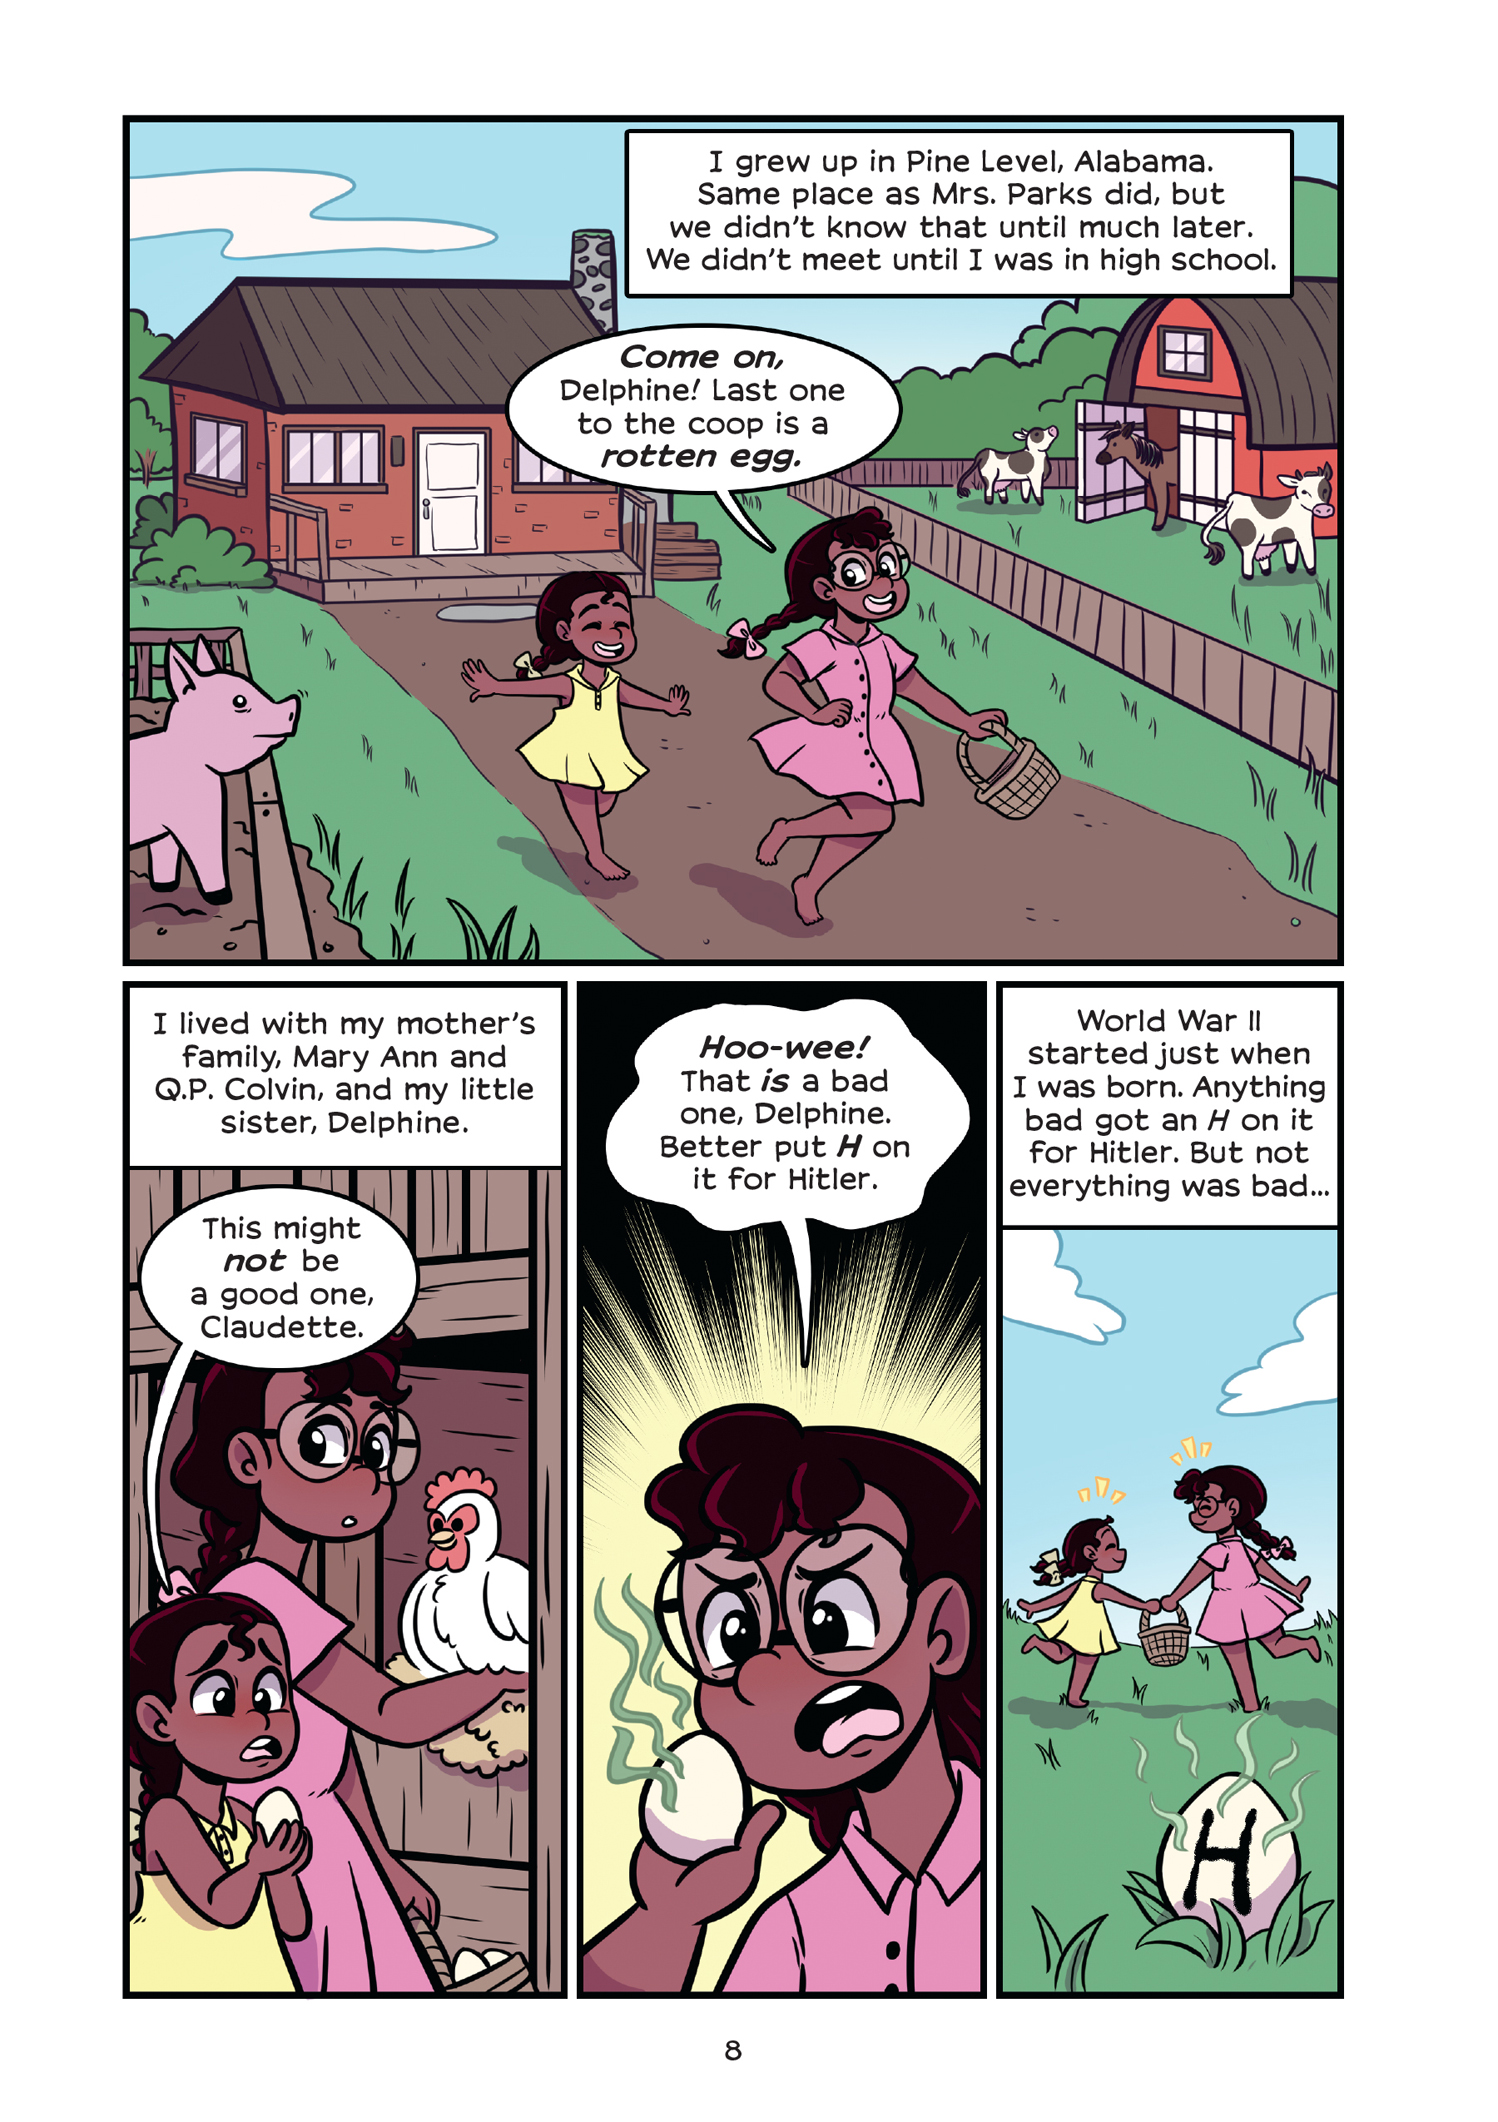 Read online History Comics comic -  Issue # Rosa Parks & Claudette Colvin - Civil Rights Heroes - 14